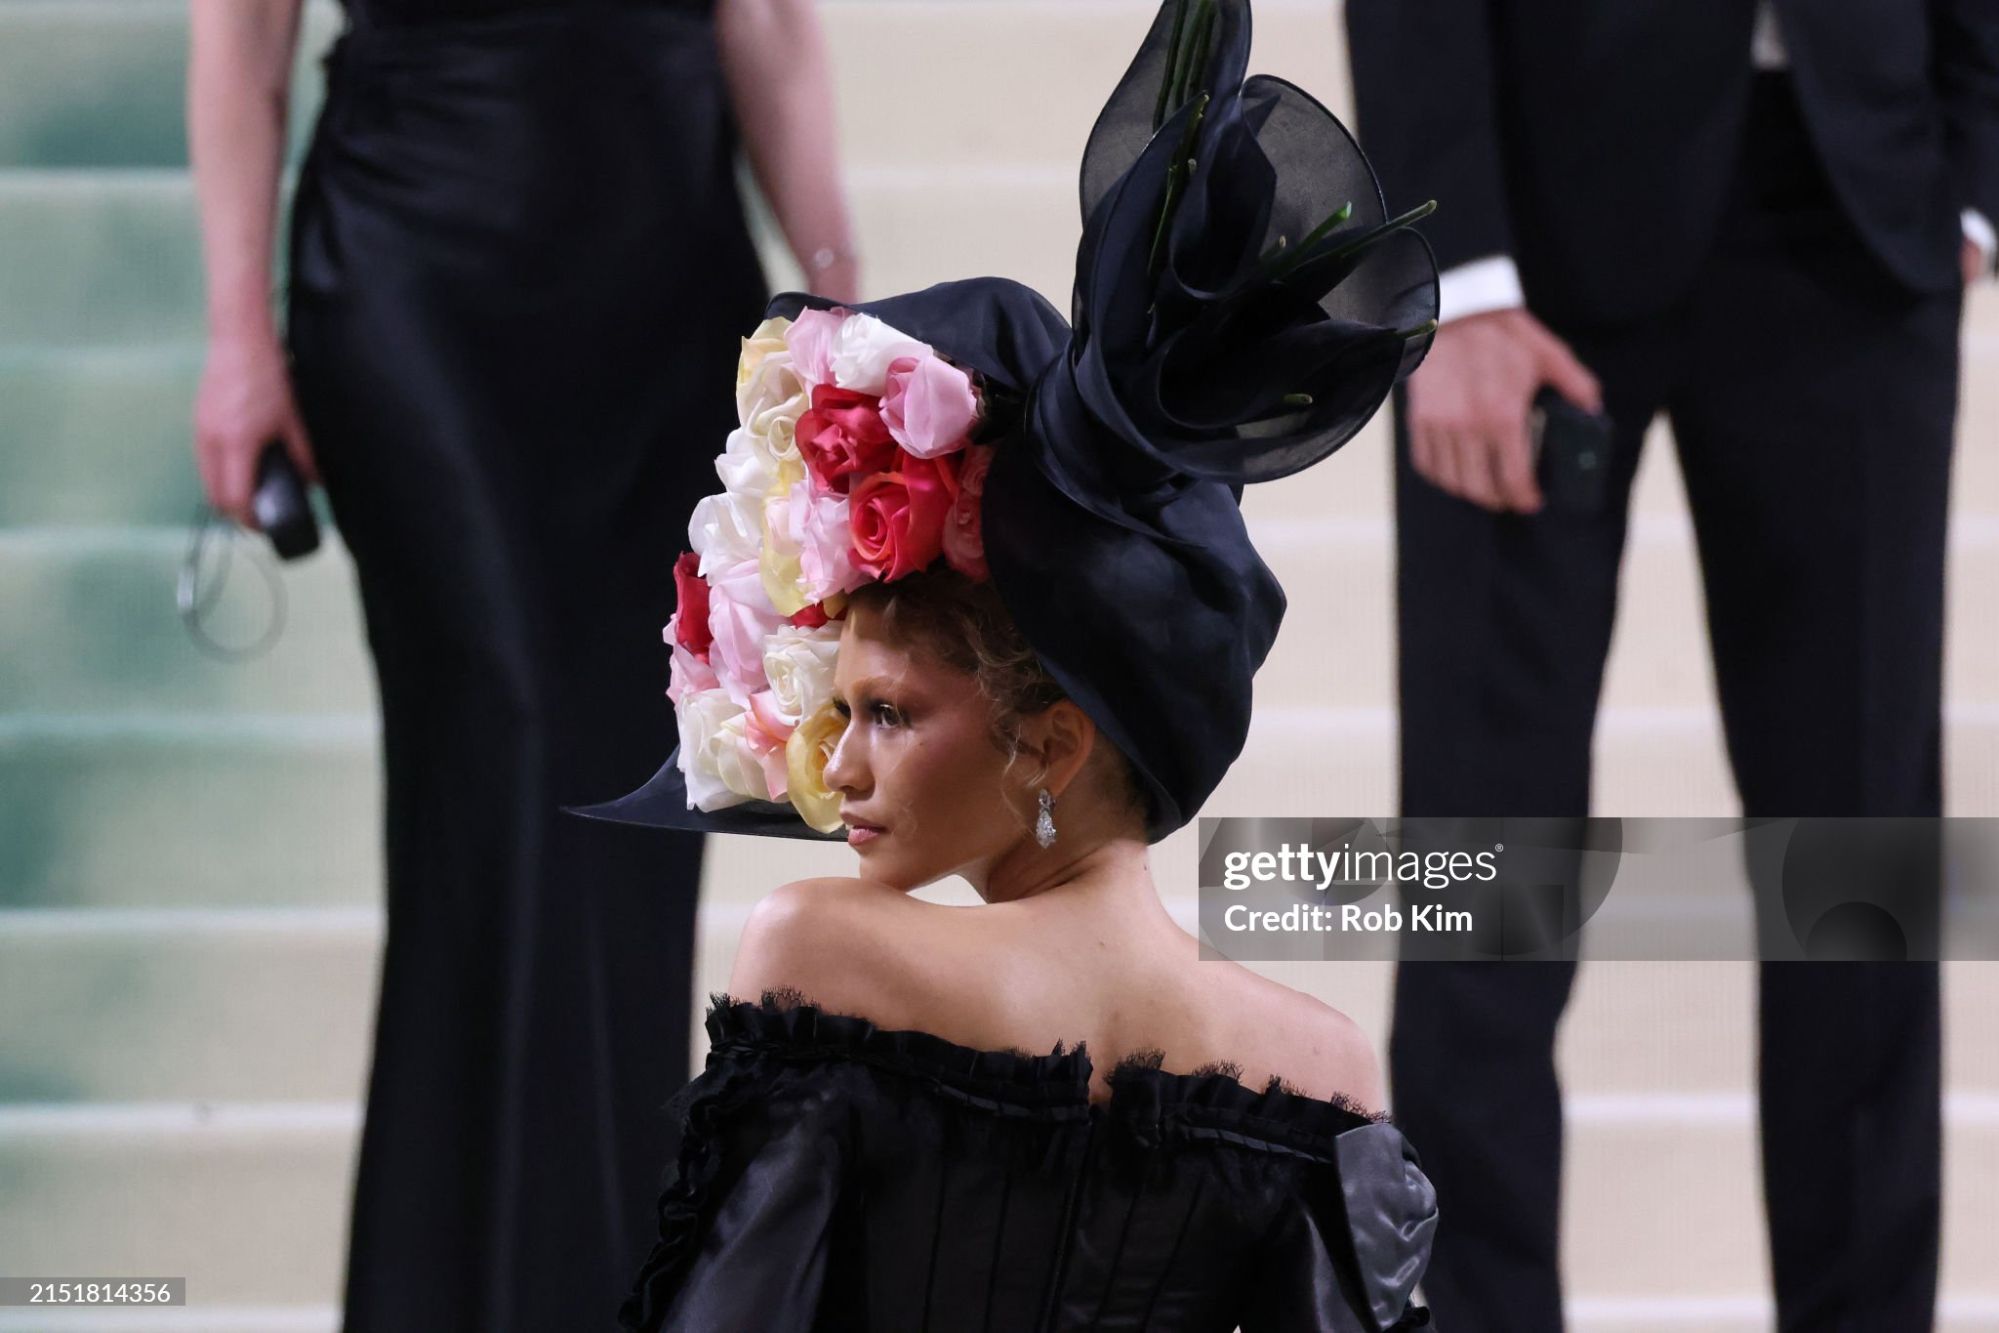 gettyimages-2151814356-2048x2048.jpg